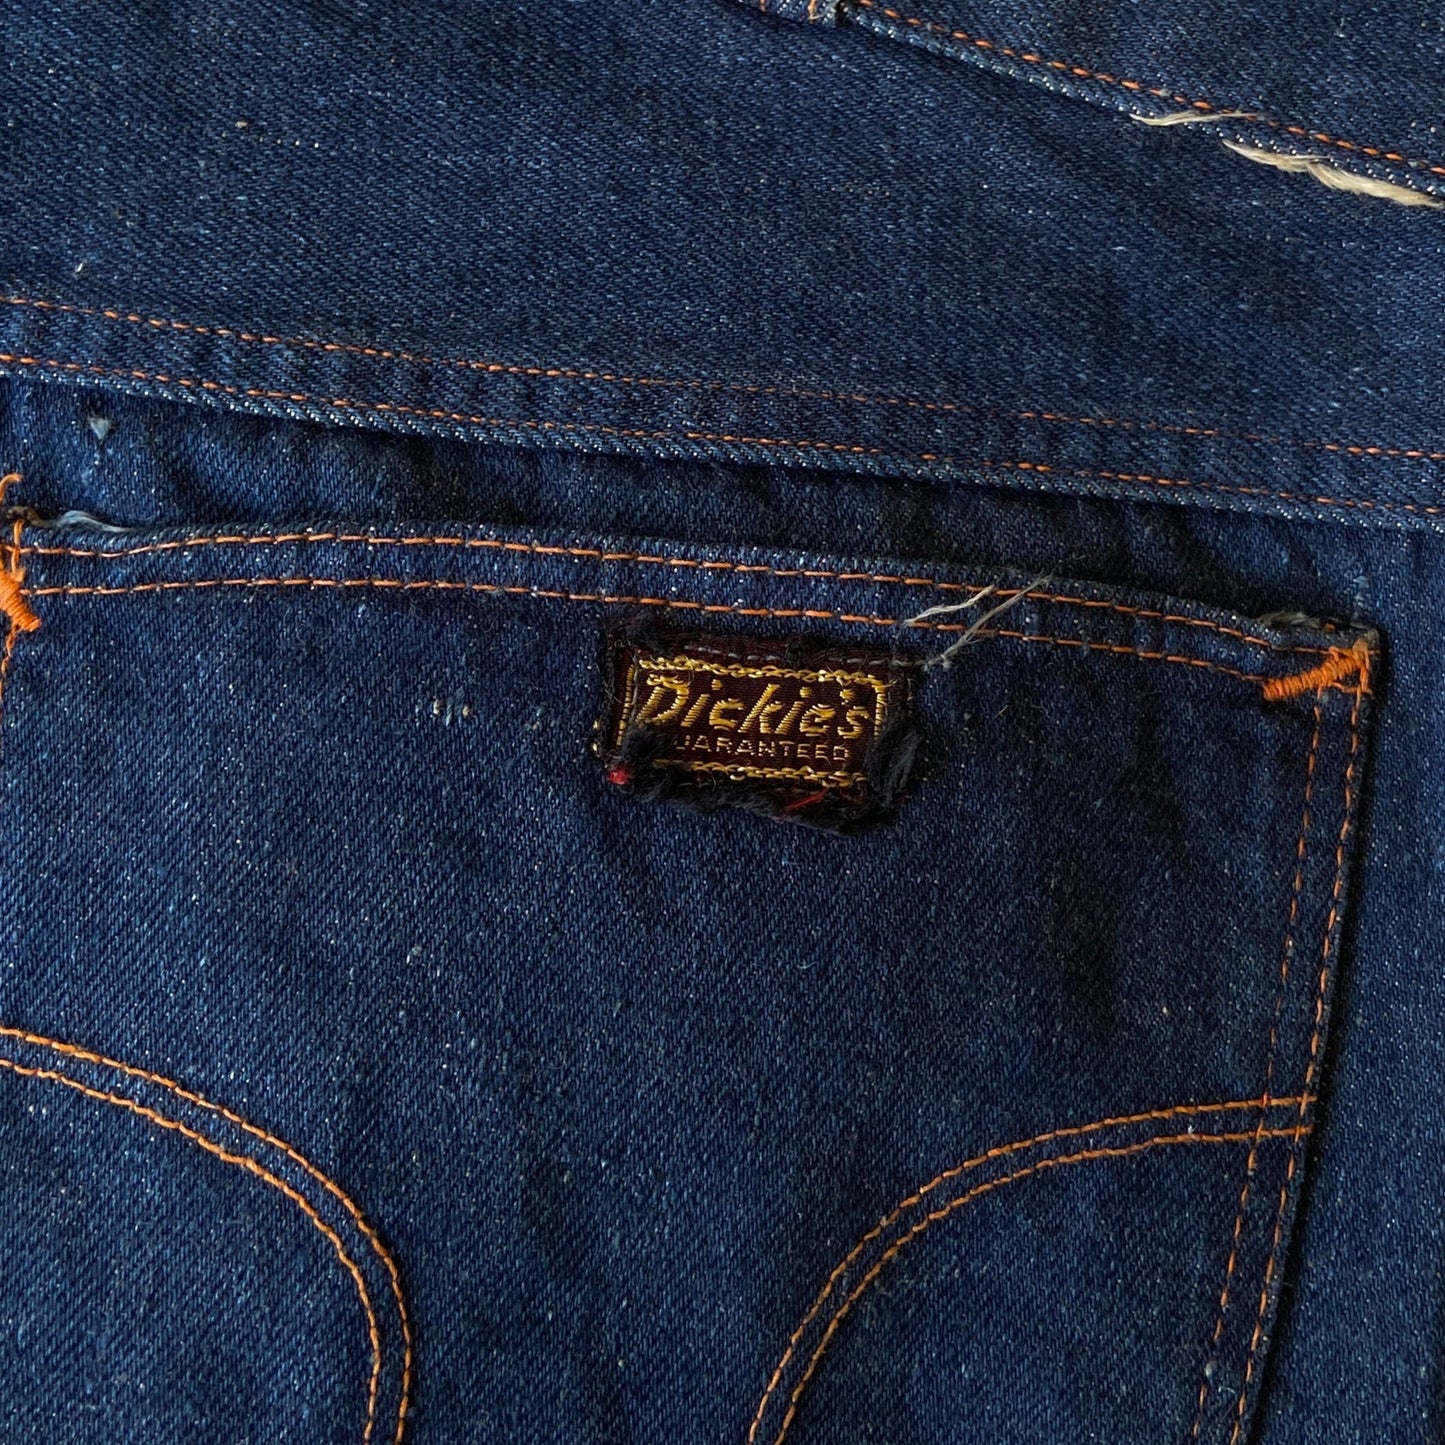 1940s Dickies Button Fly Jeans 28 29 in W